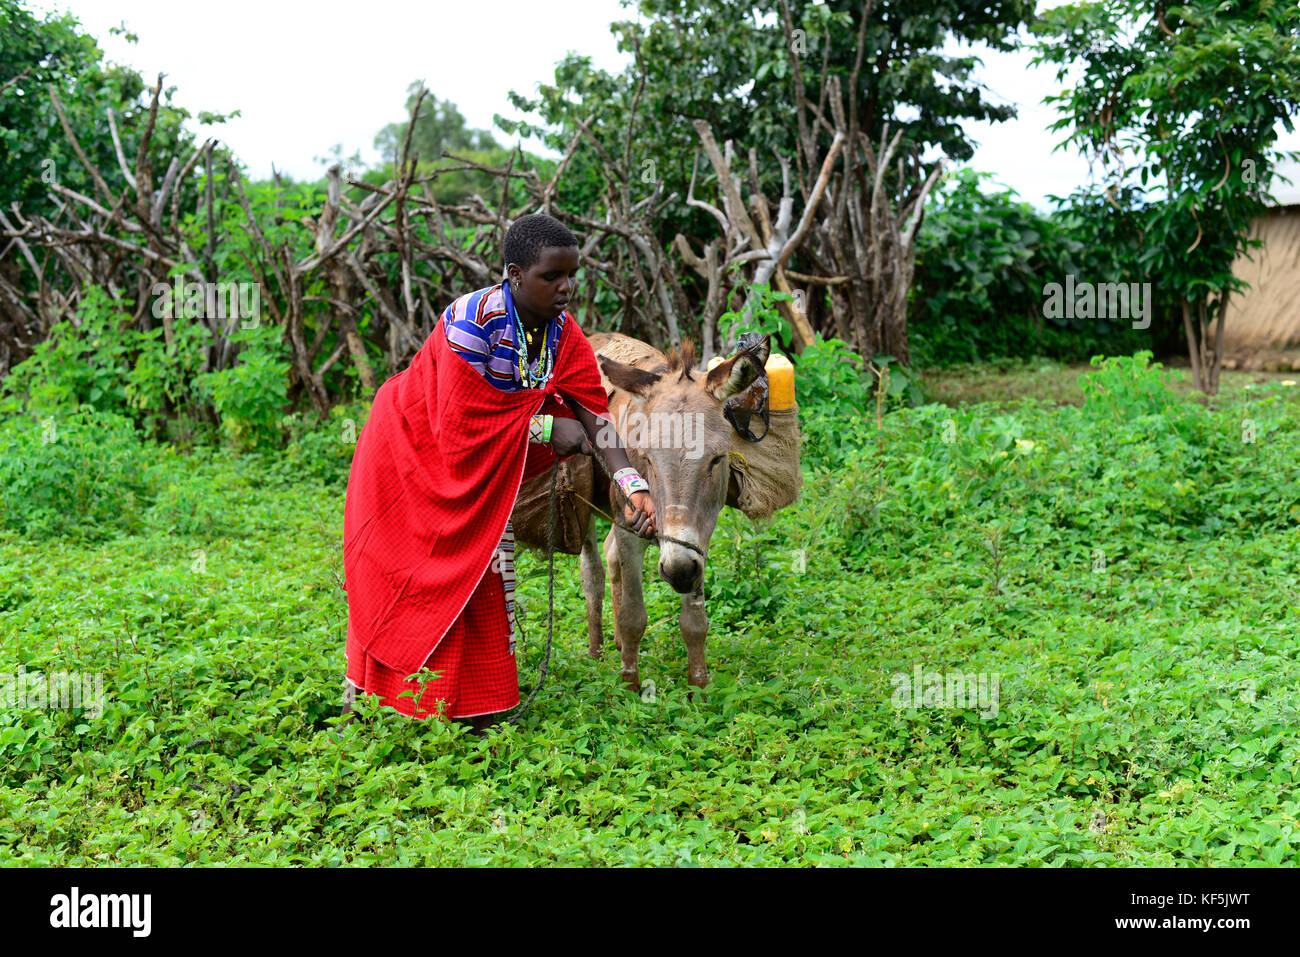 A Maasai woman with her donkey. Stock Photo